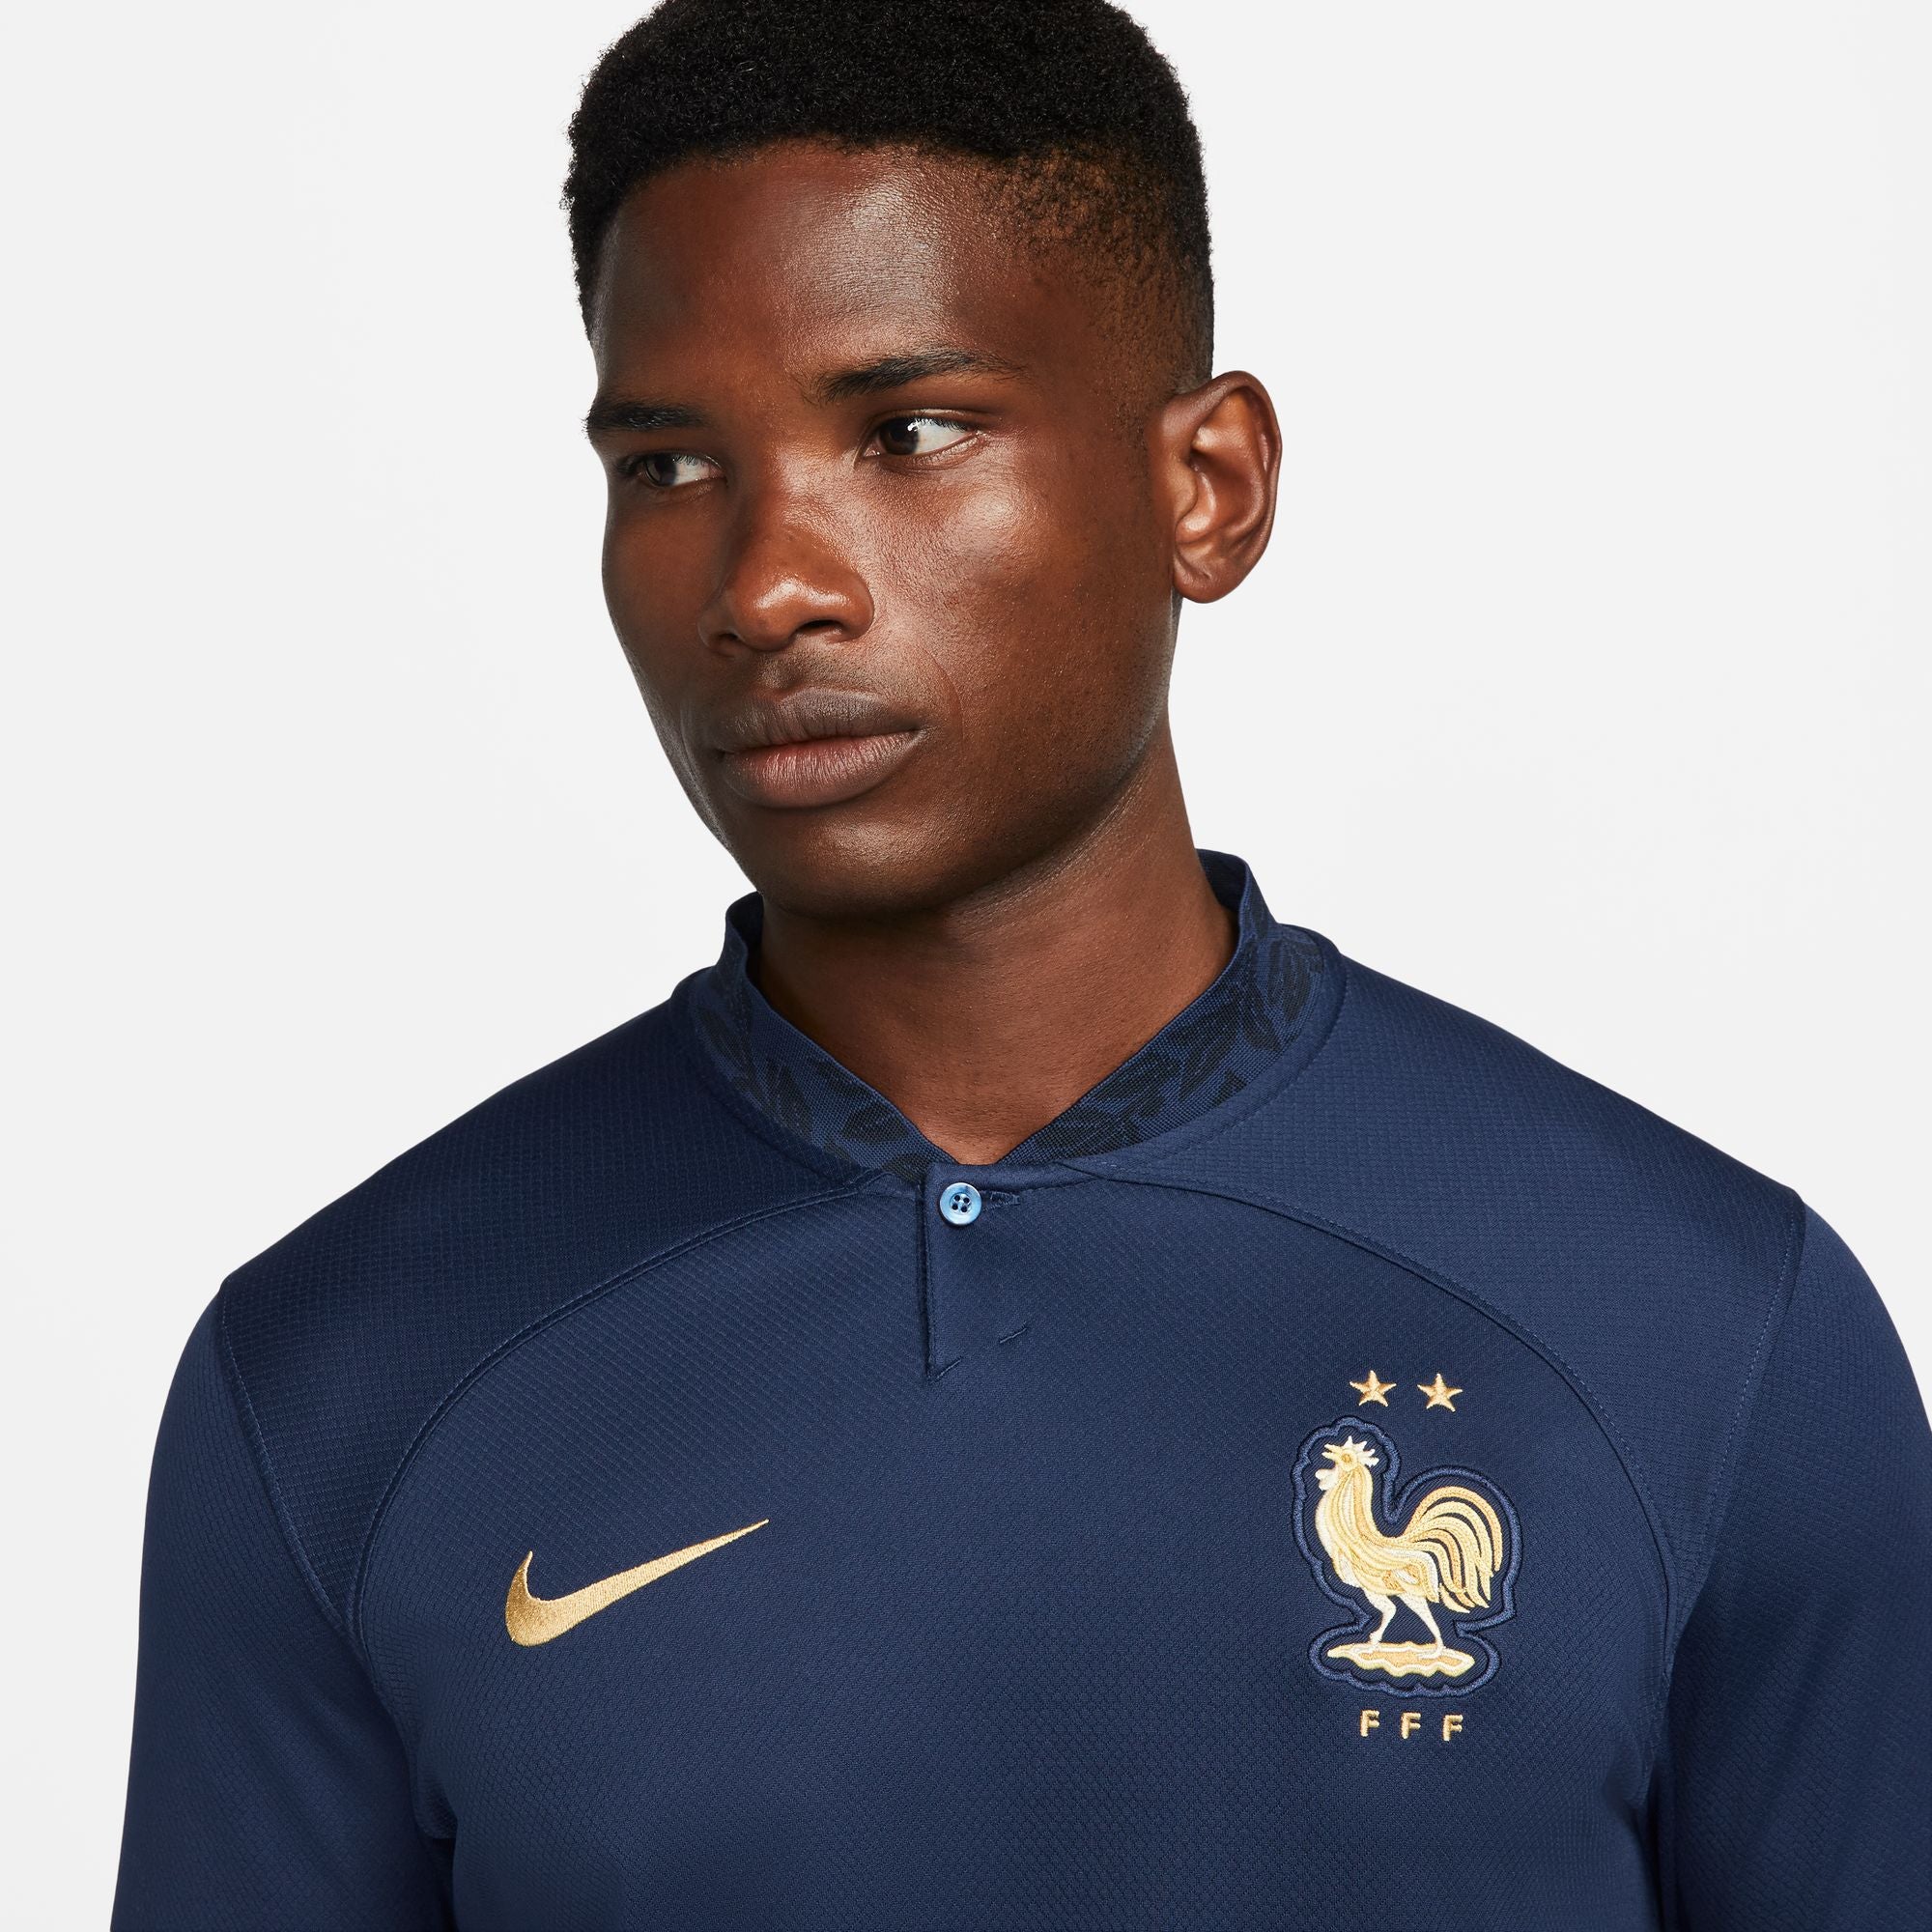 jersey france world cup 2022